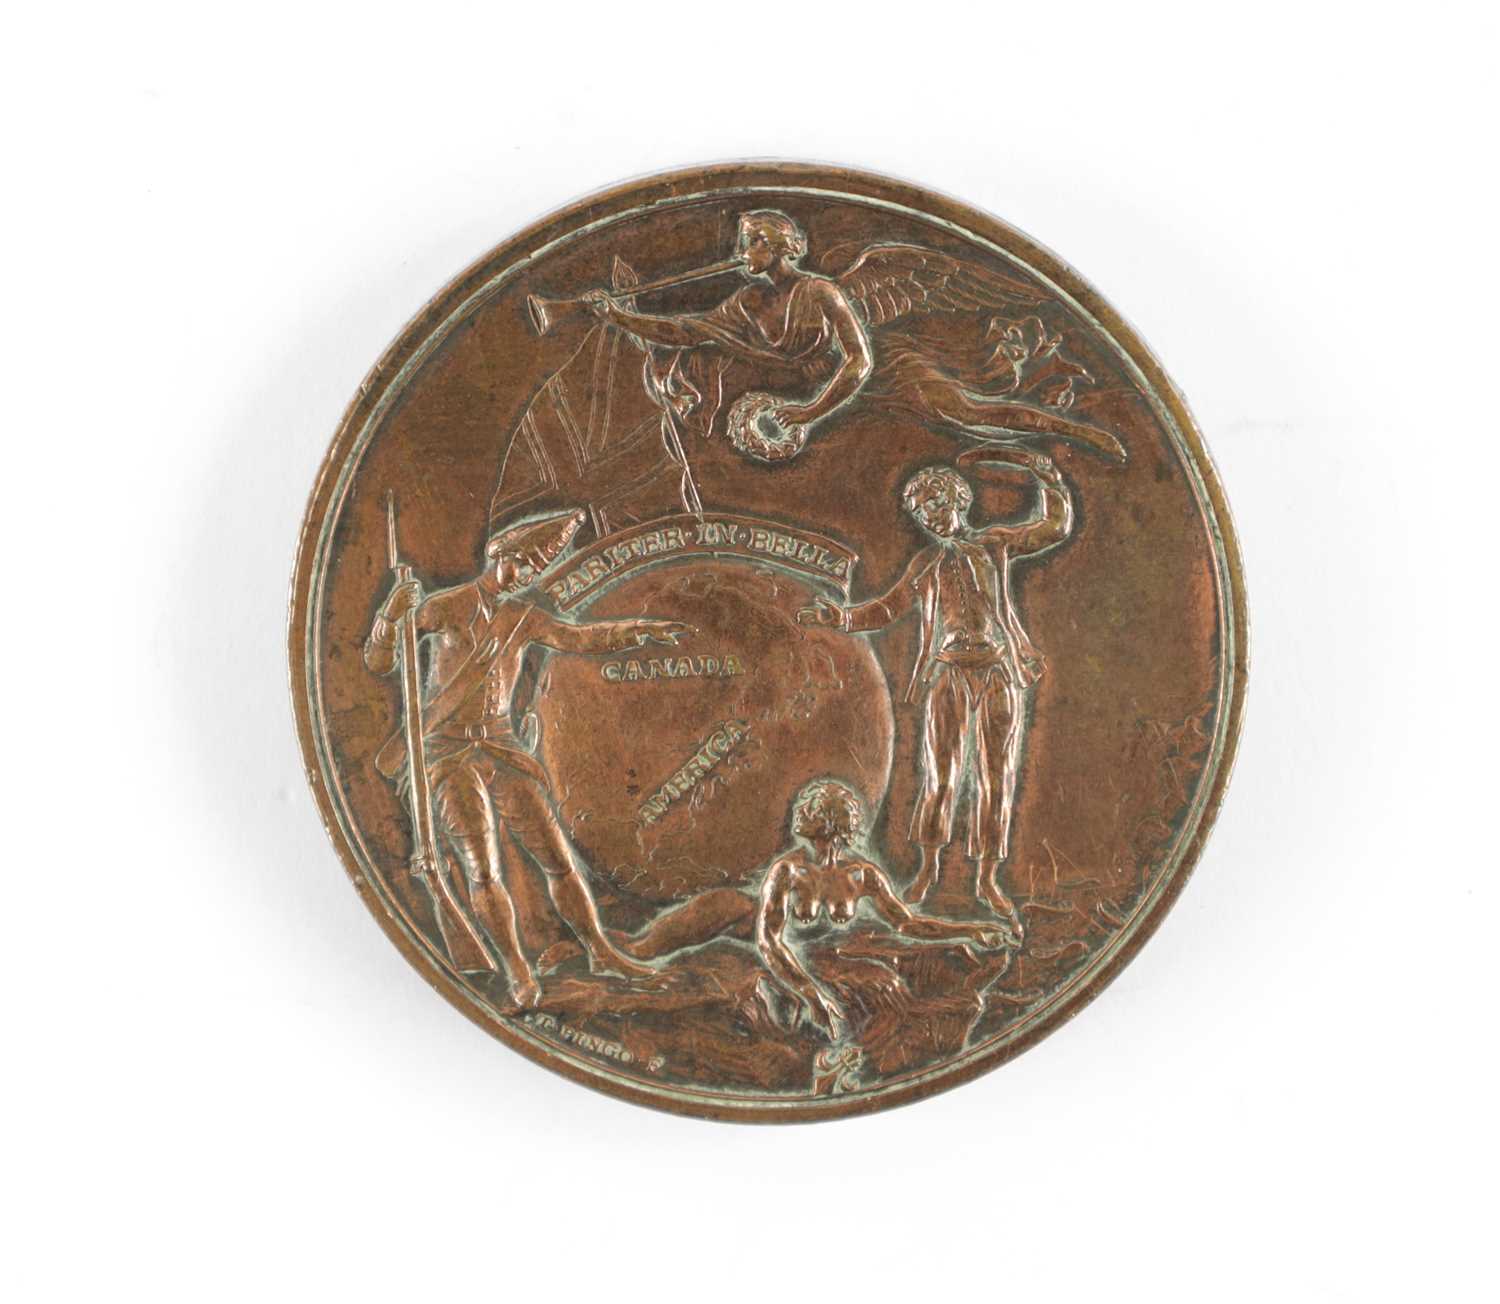 Lot 825 - A RARE COPPER MEDAL COMMEMORATING THE CAPTURE OF LOUISBOURG IN 1758